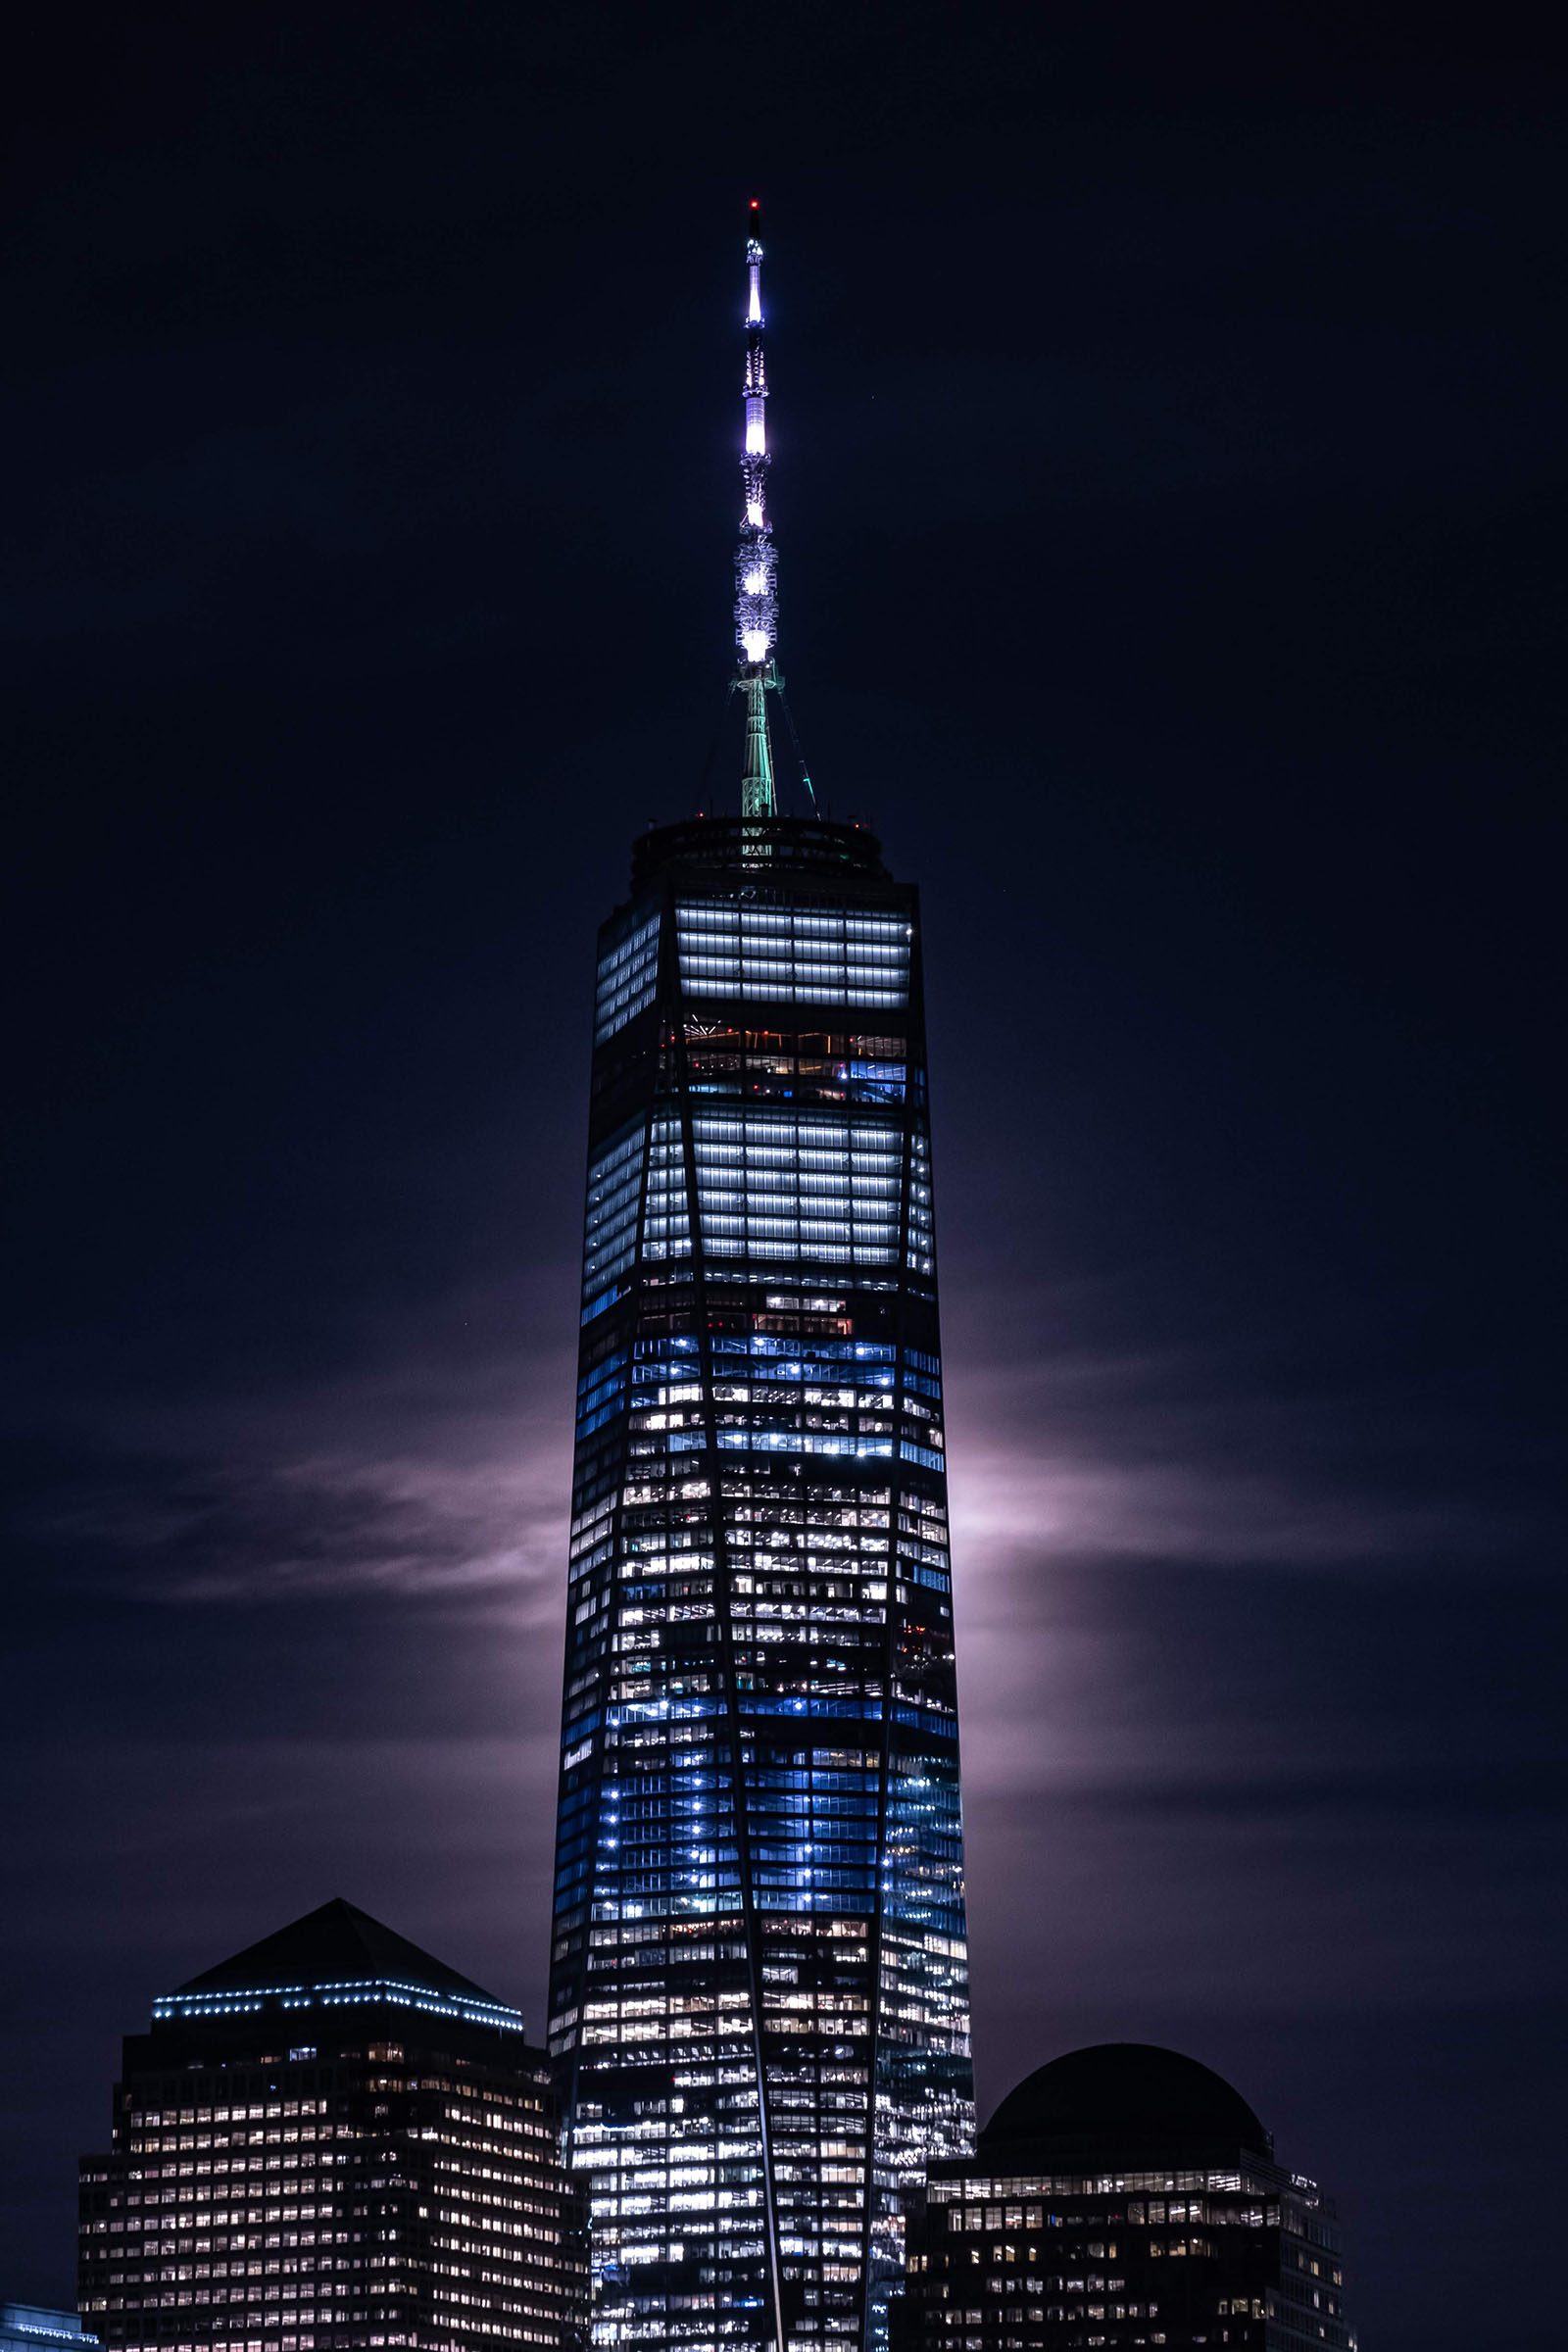 The moon passing behind the One World Trade Center